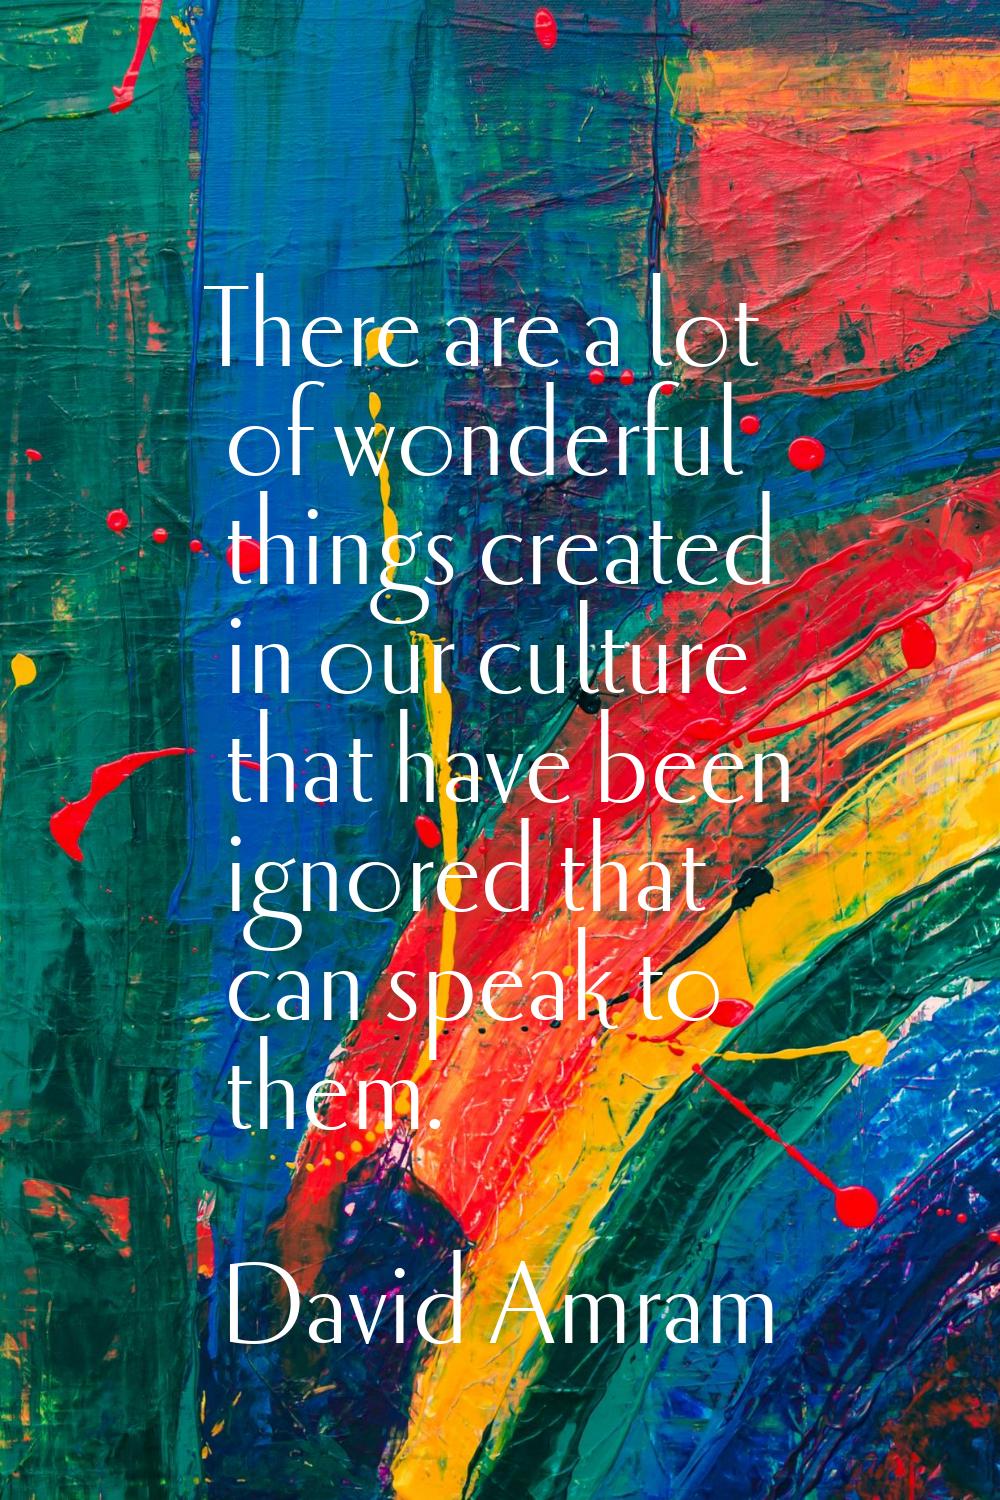 There are a lot of wonderful things created in our culture that have been ignored that can speak to